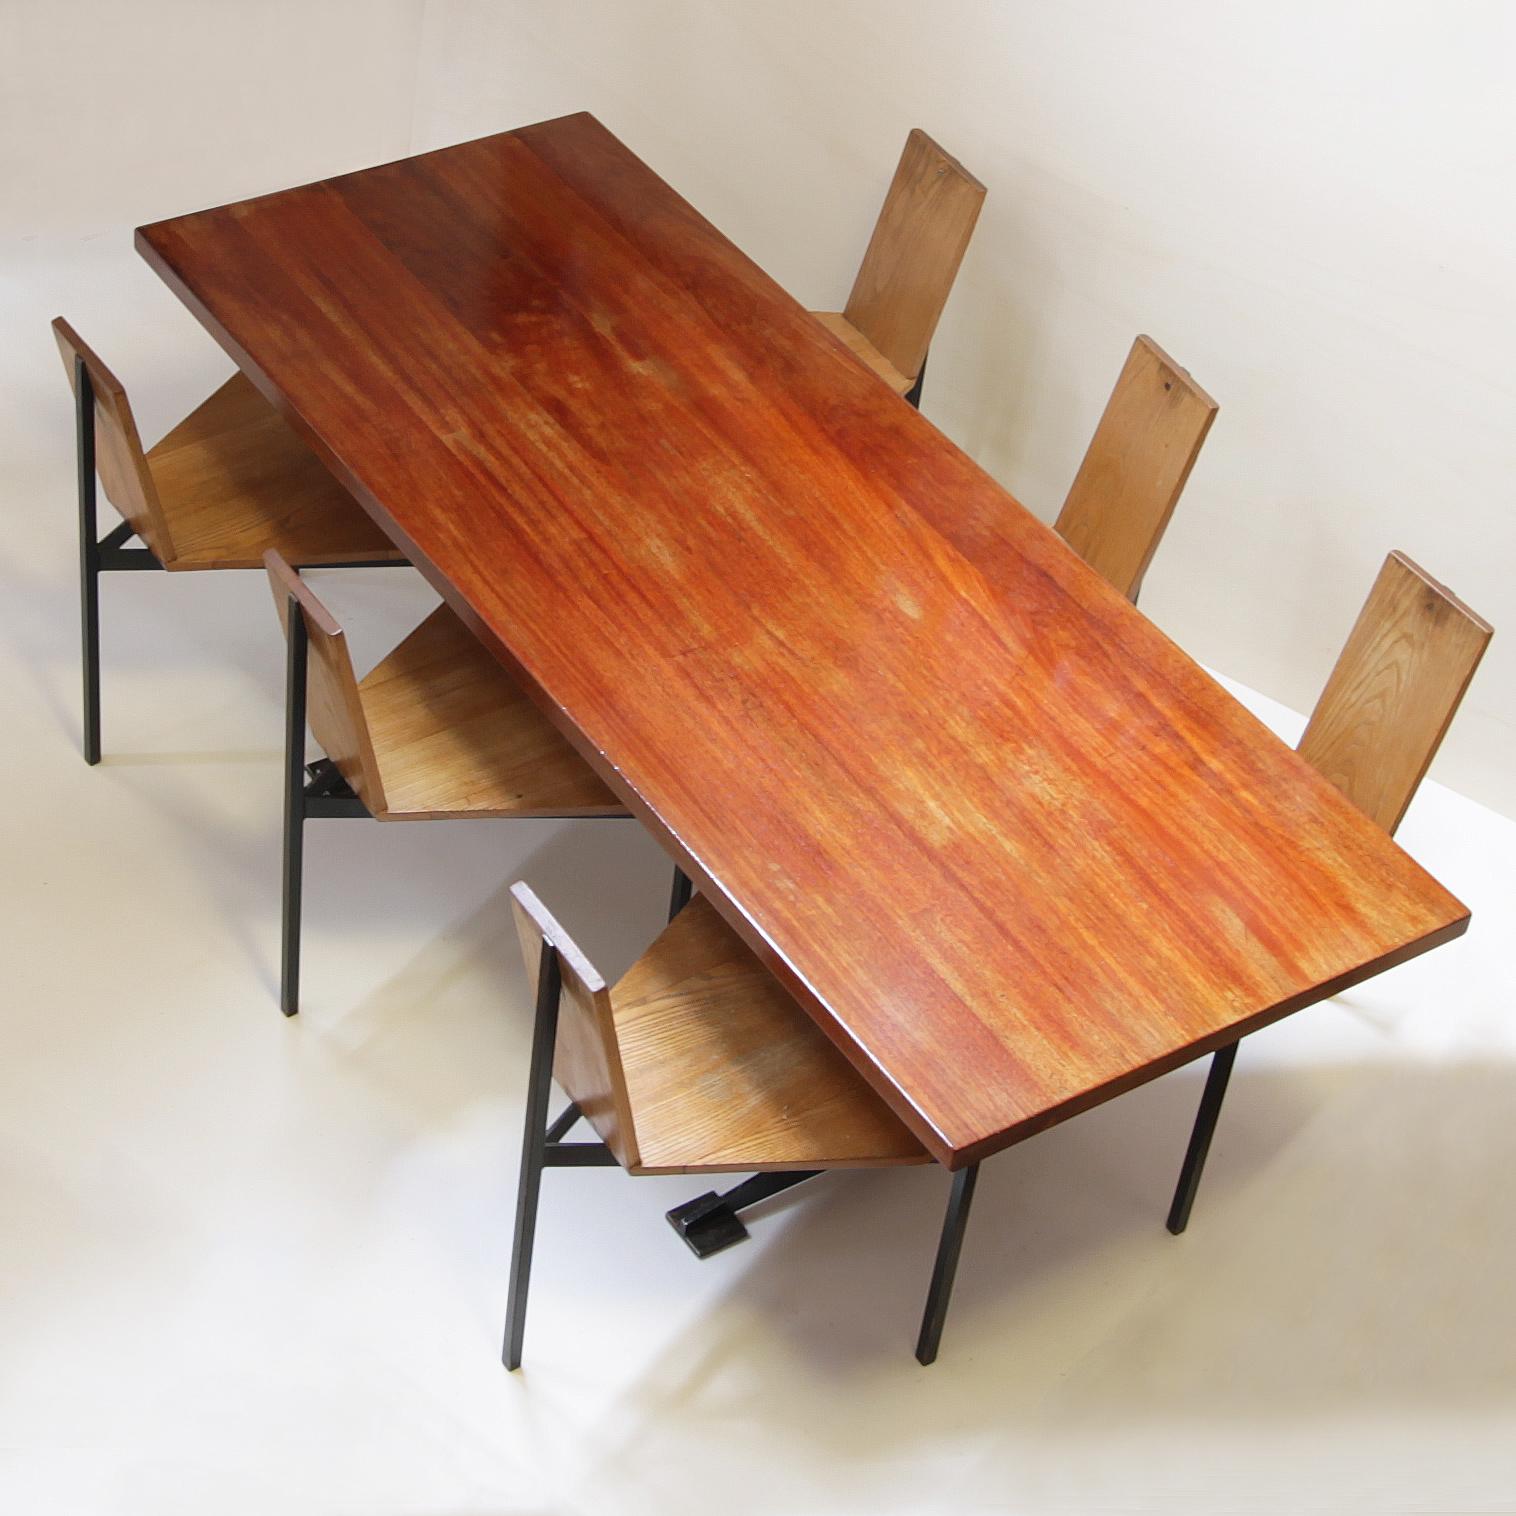 Mid-Century Modern Dining Table and Six '6' Chairs by Wim Den Boon, Netherlands 1958 For Sale